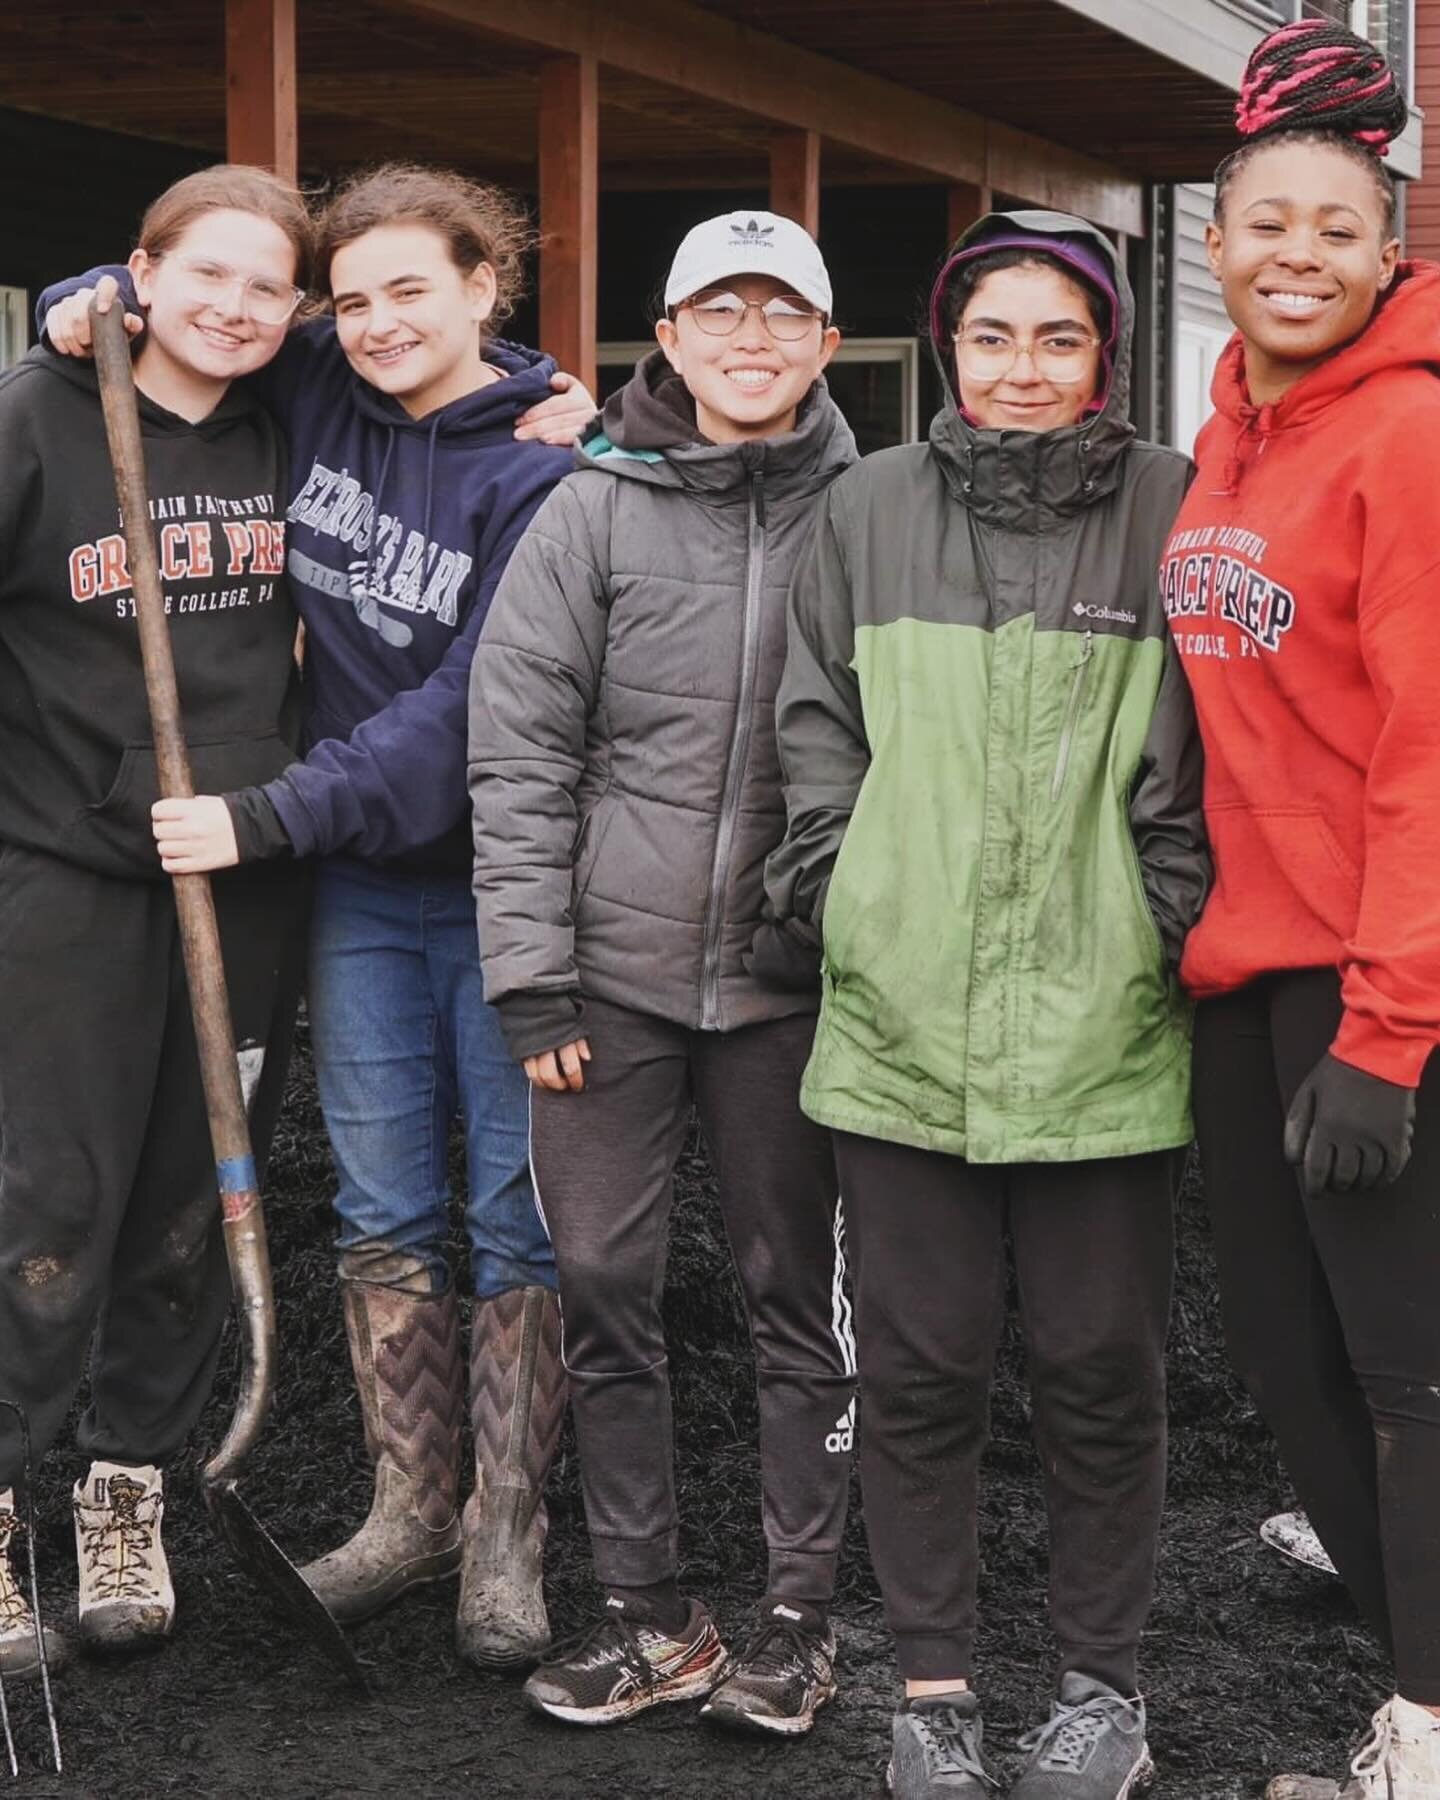 Despite rain, snow, and hail, Mulch Madness succeeded. Thank you to Jason Maas and Deeanne Hagerup Maas for coordinating the fundraiser &amp; our hardworking students and staff who spread 194 yards of mulch across Centre County!

And a BIG thank you 